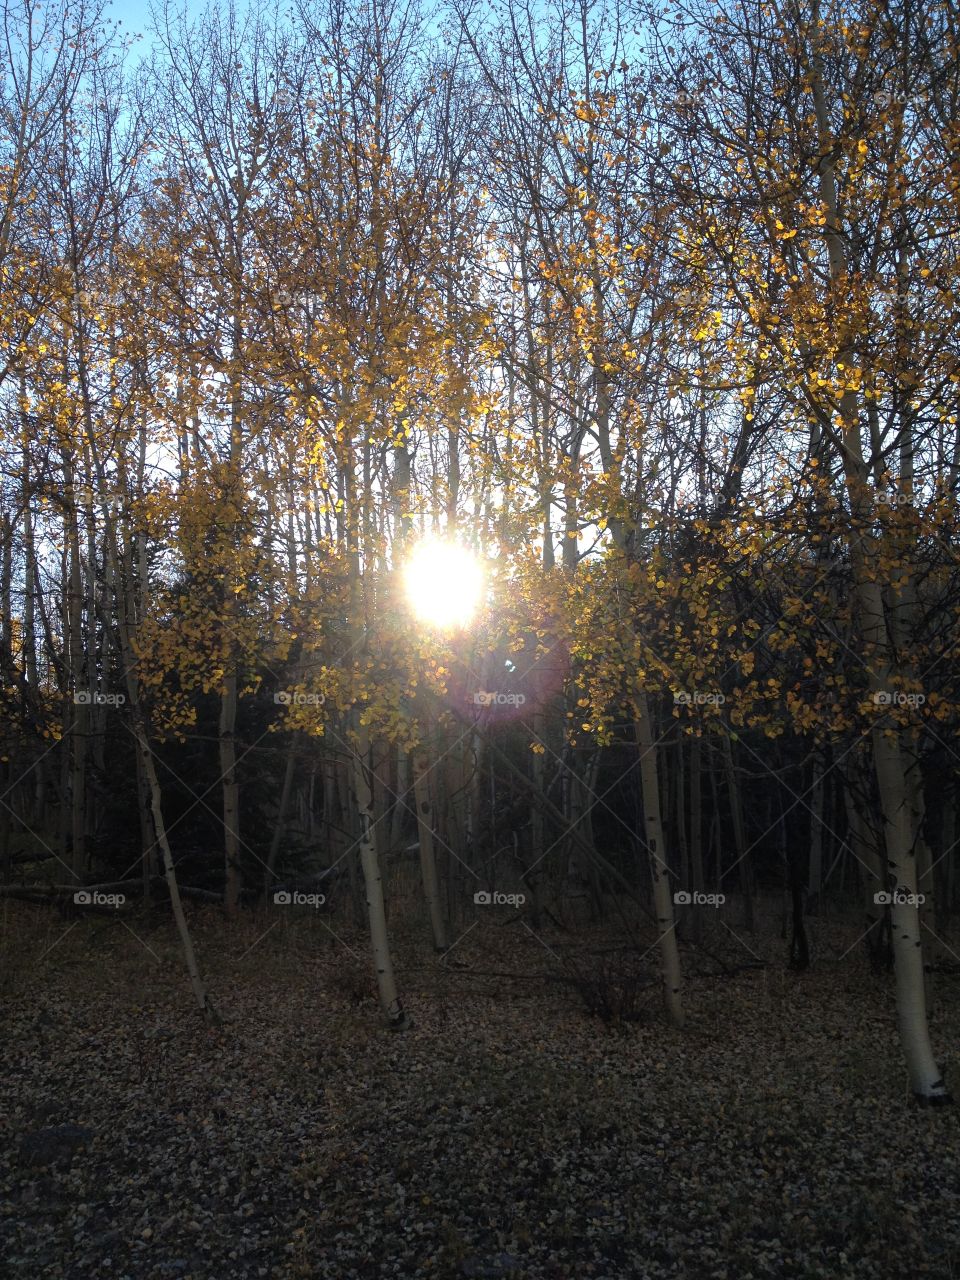 Fall evening. Sunday afternoon drive to see the Aspen trees. 